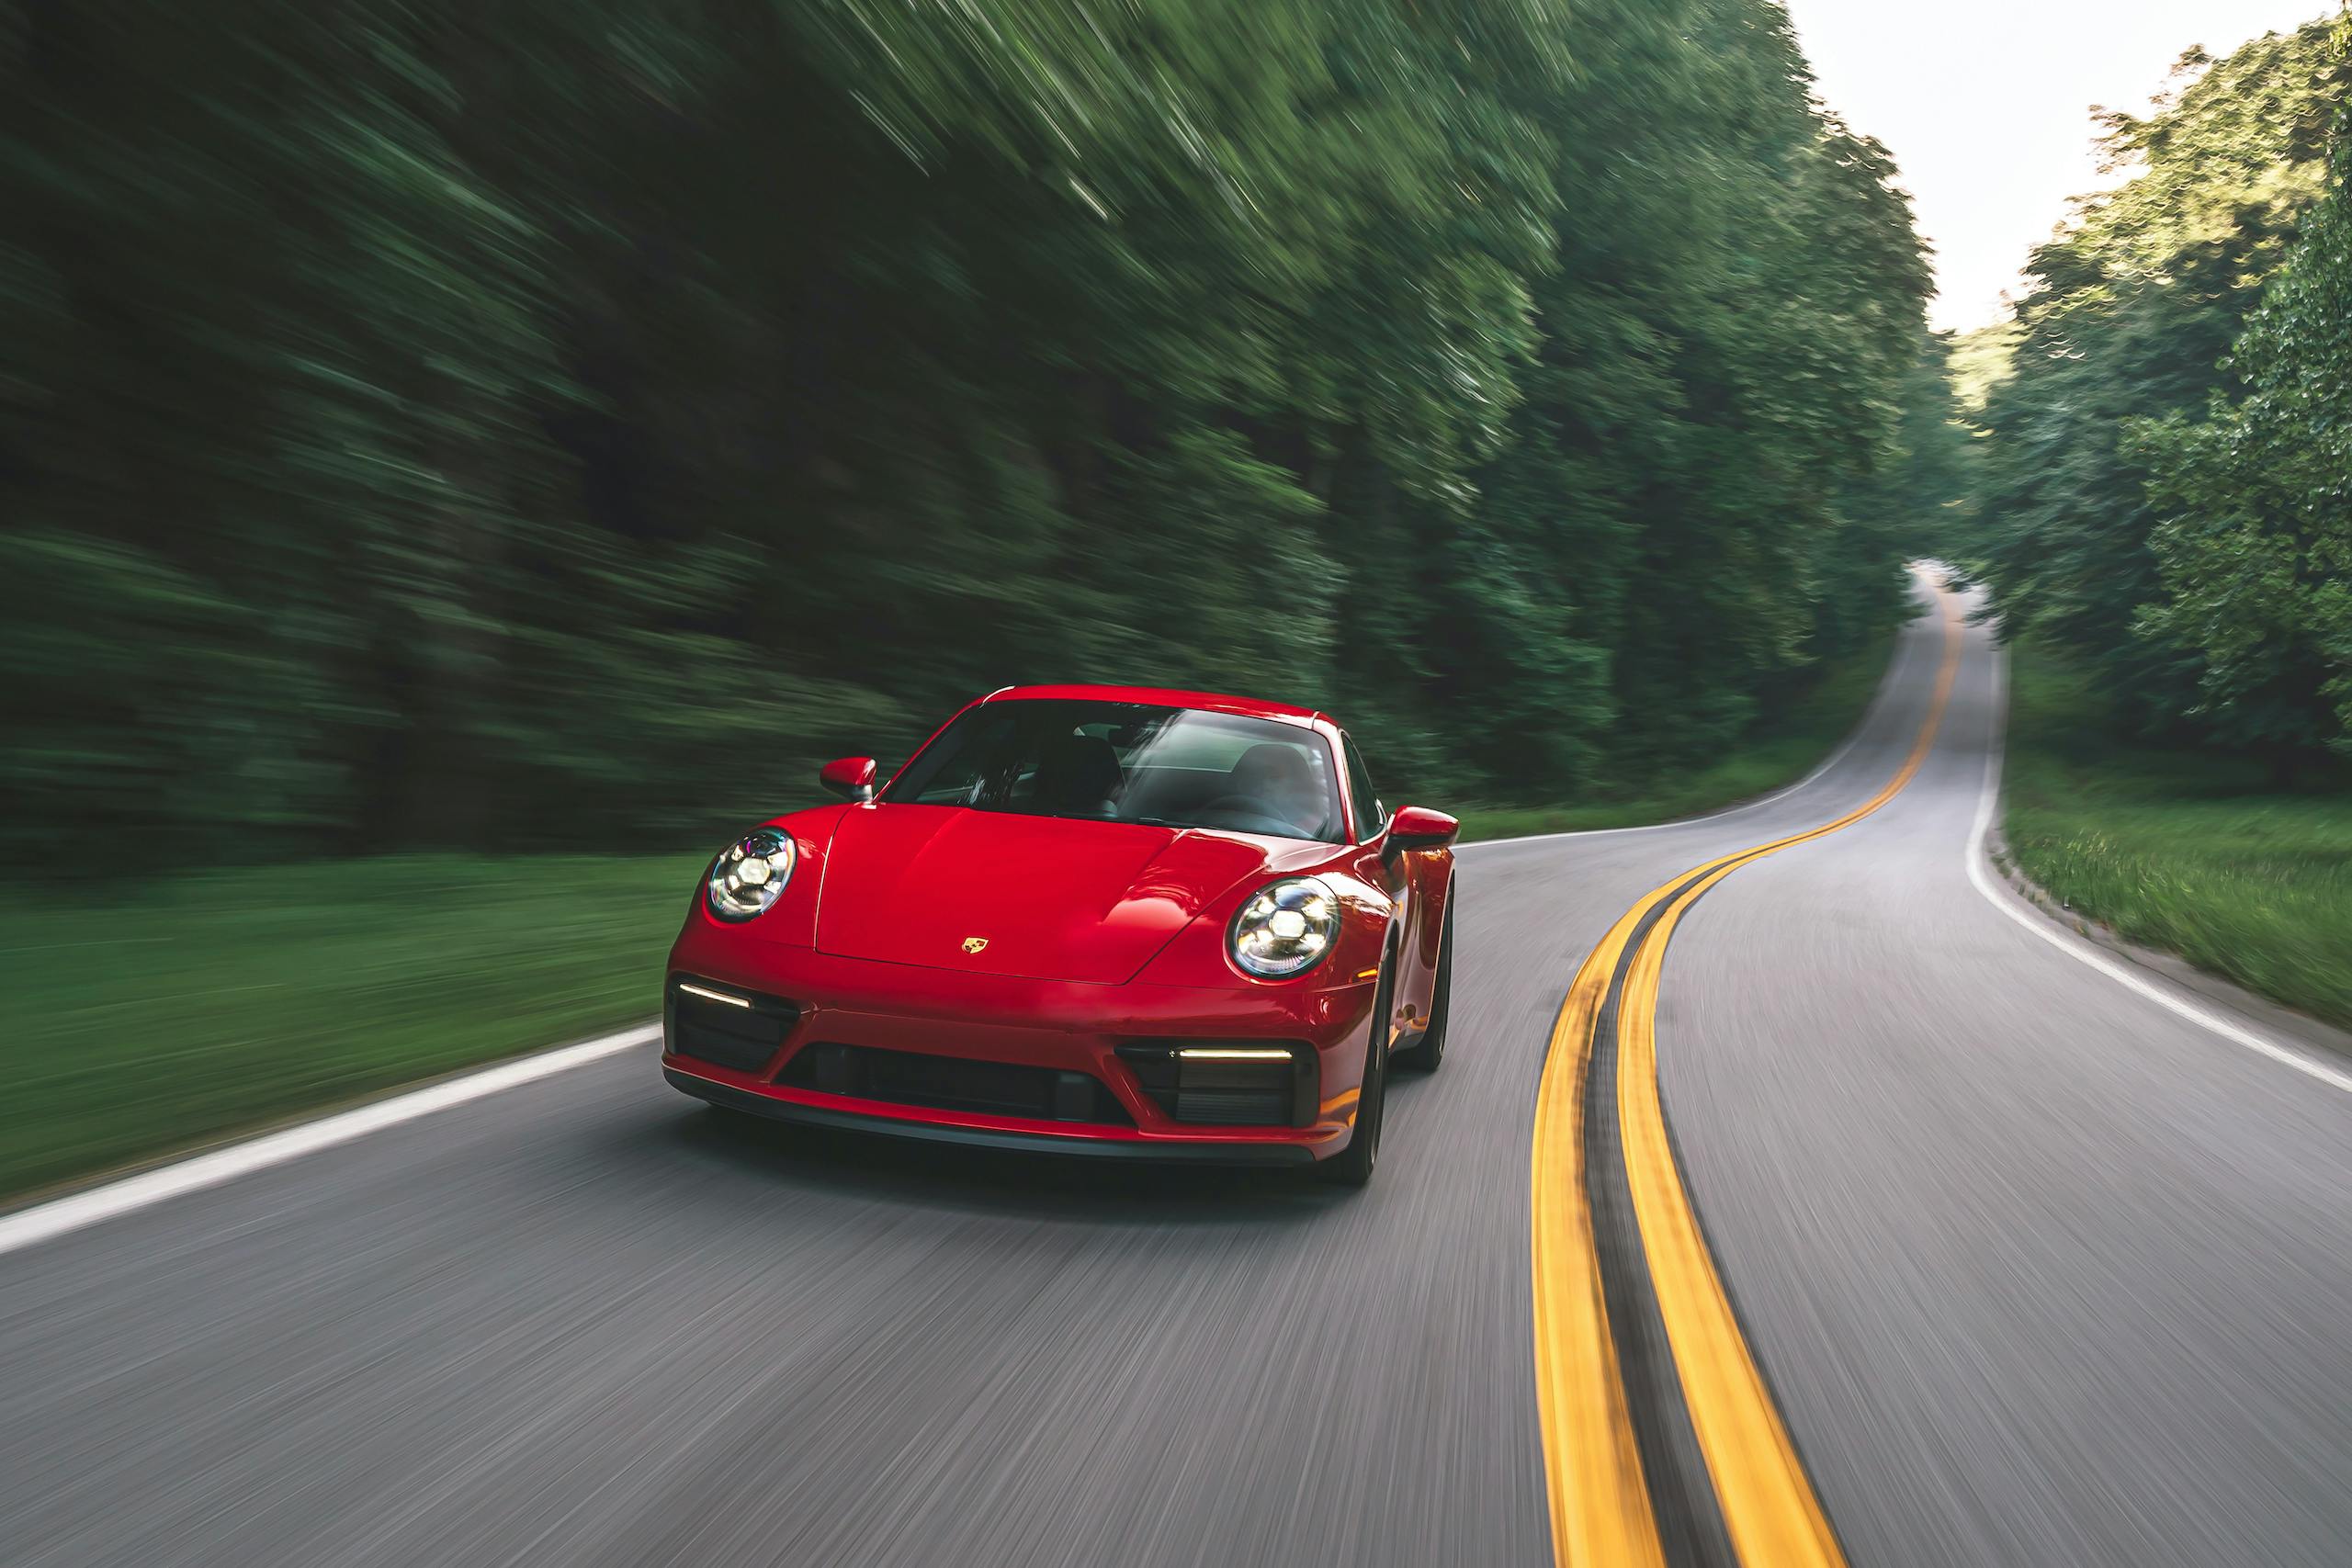 First Look Review: 2022 Porsche 911 GTS - Hagerty Media